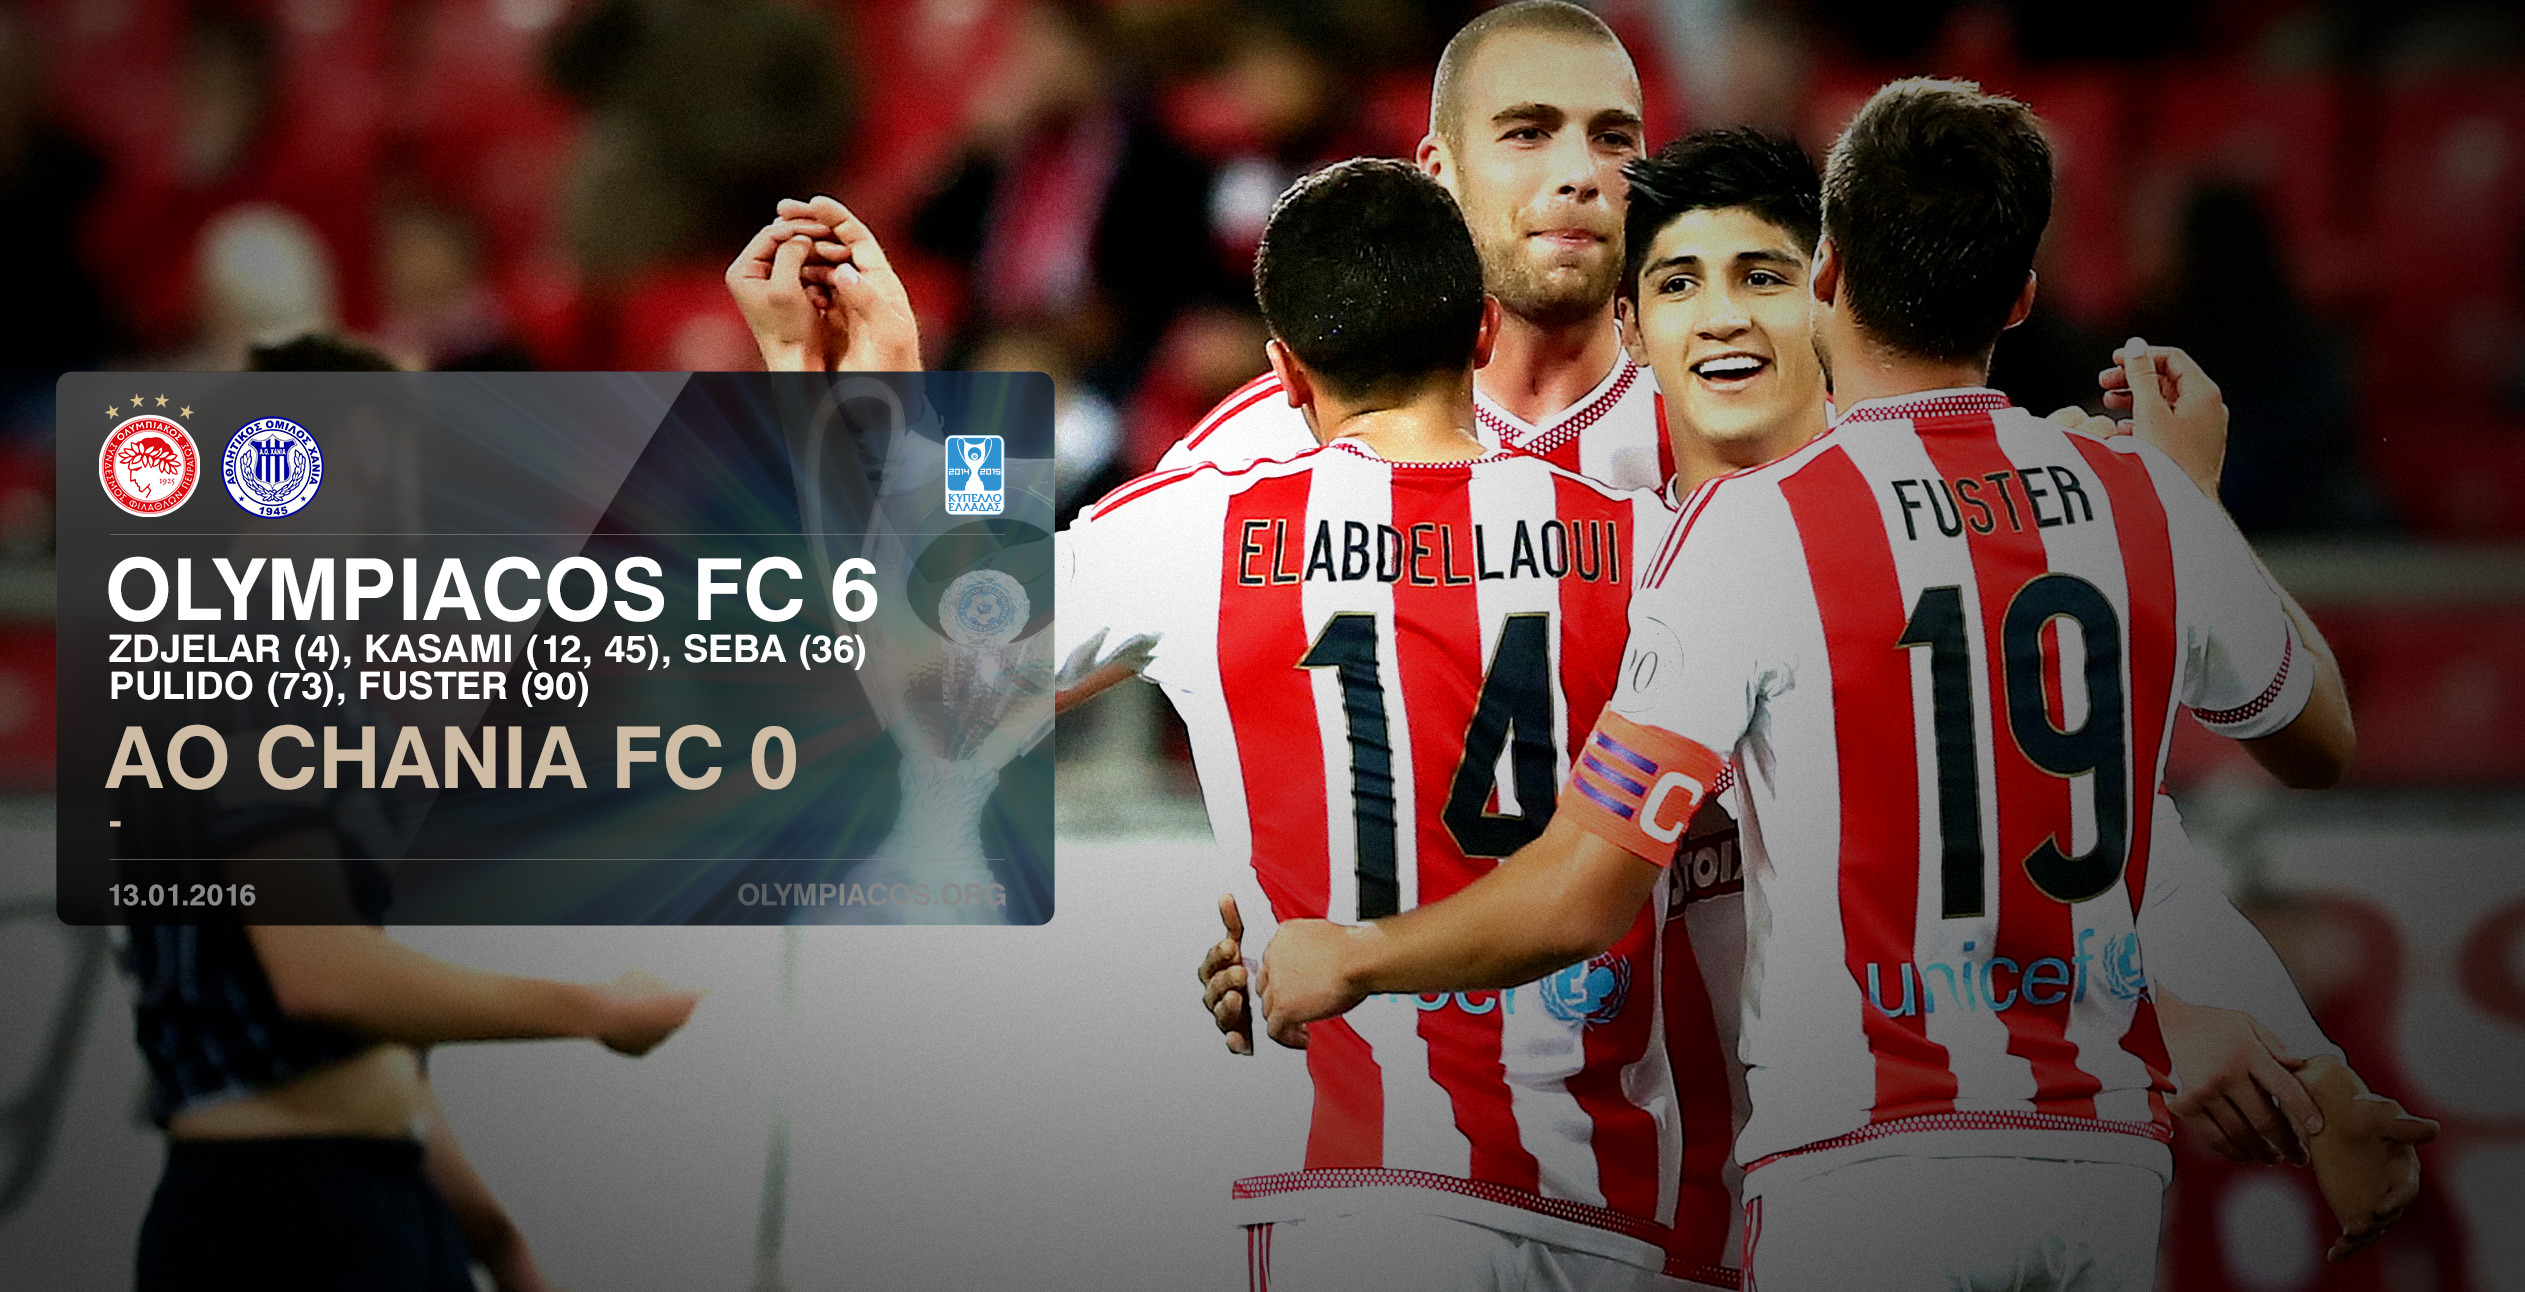 Olympiacos score 6 goals and qualify to the Cup semi-finals